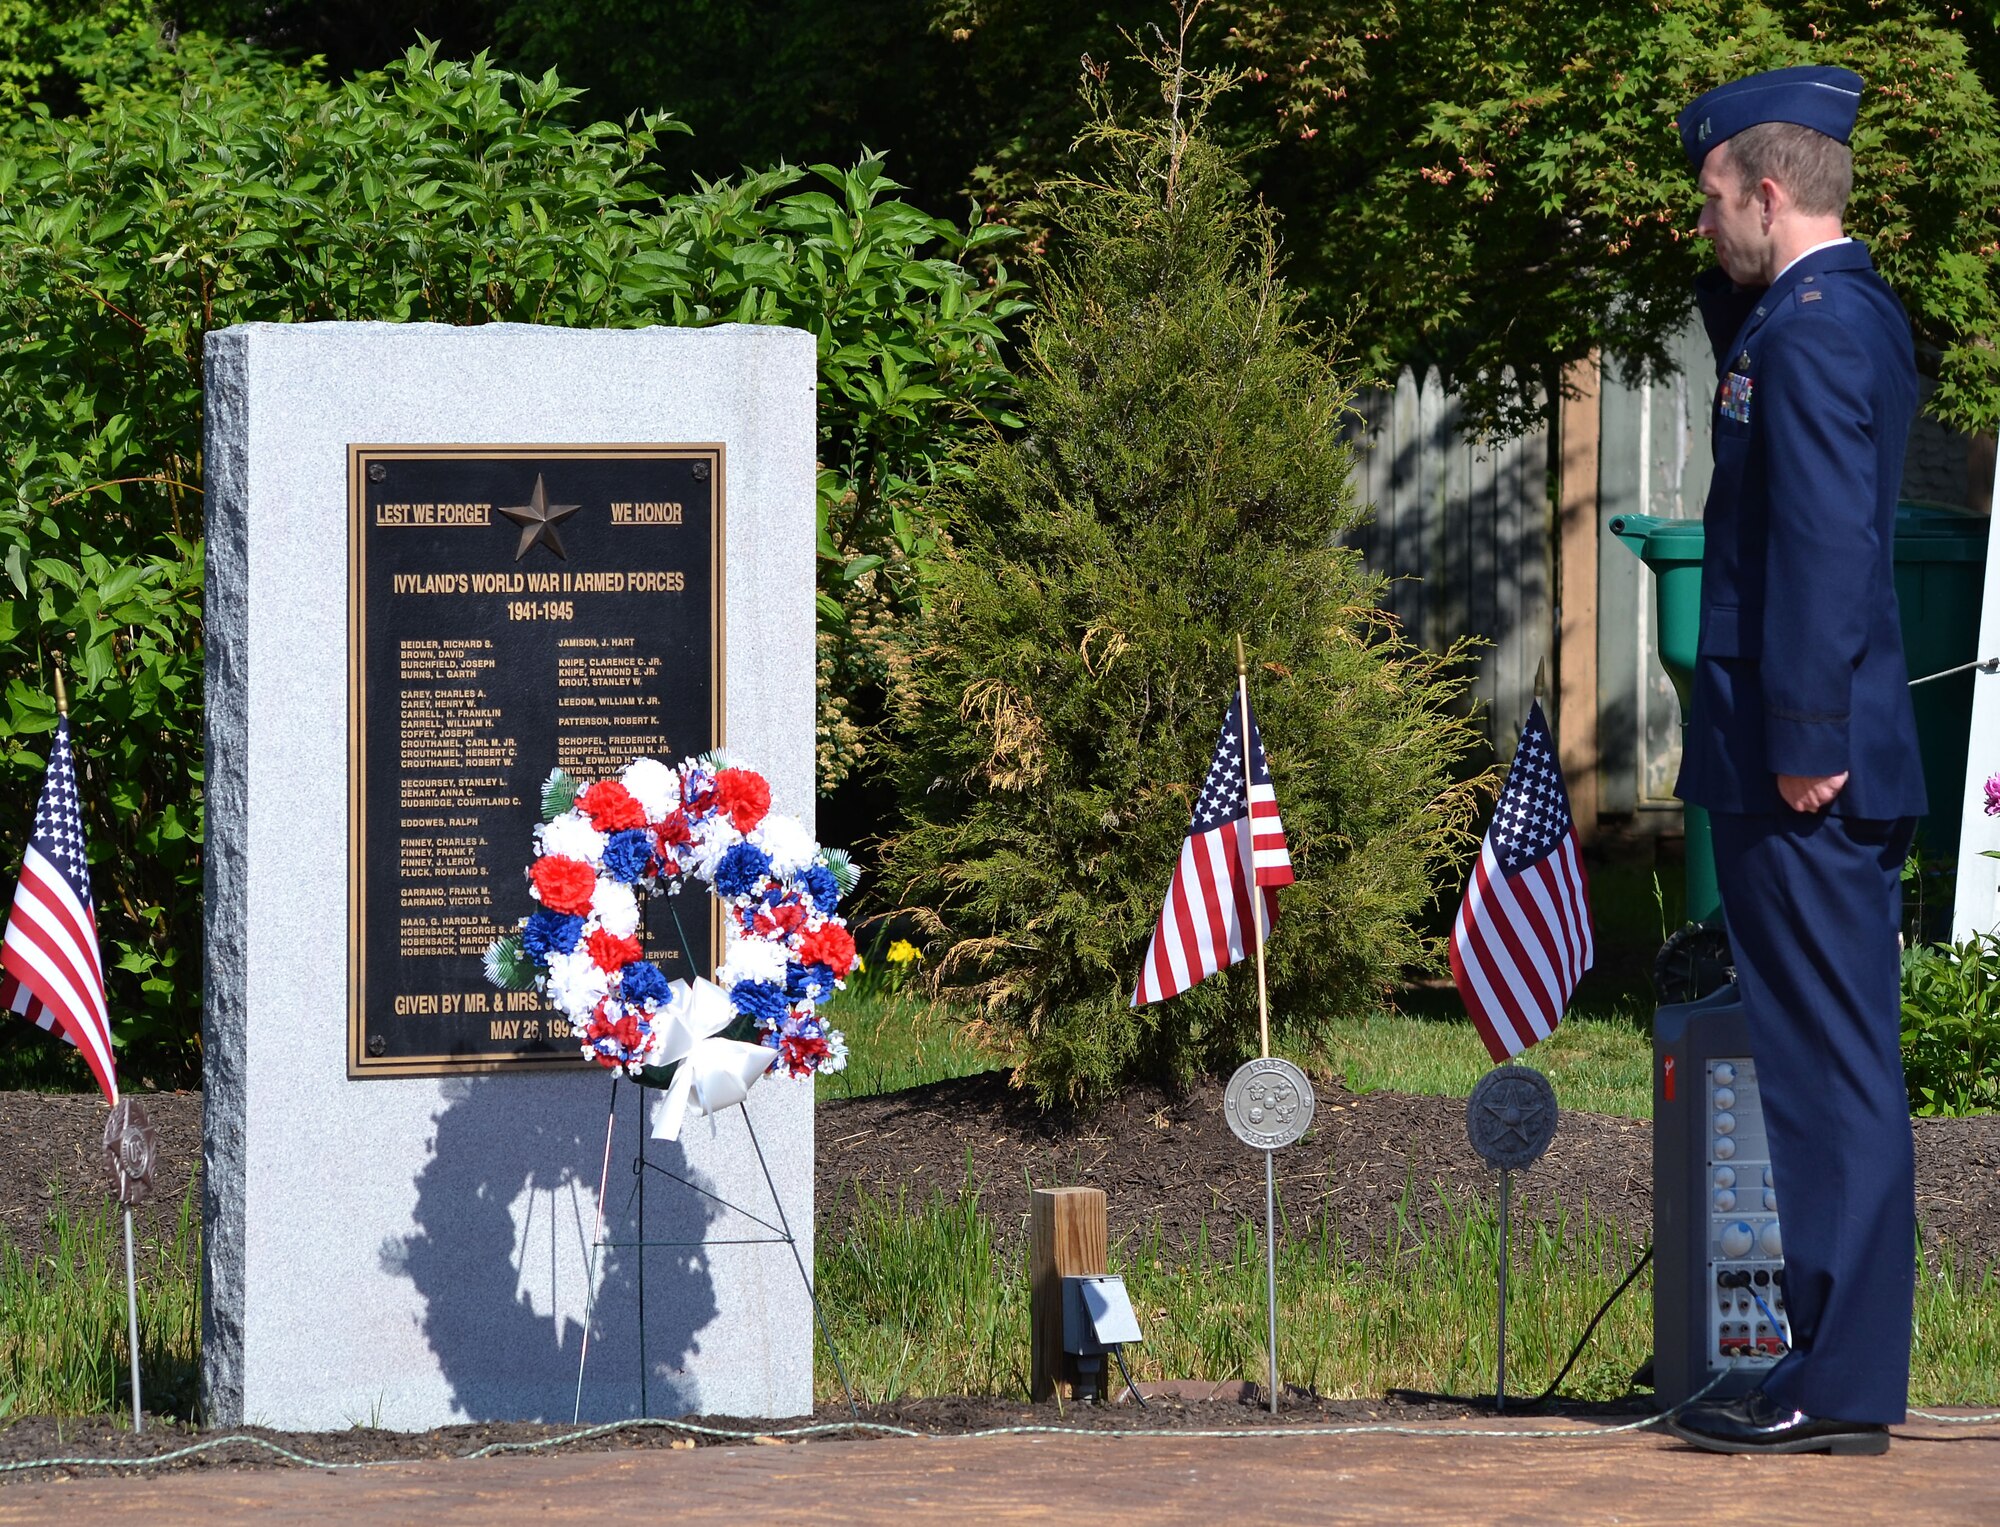 During a wreath laying ceremony in Ivyland, Pennsylvania, May 25, 2015, Capt. Timothy McManus, wing executive officer with the 111th Attack Wing at Horsham Air Guard Station, renders a salute to resident veterans of World War II as “Taps” is played in the background. (U.S. Air National Guard photo by Master Sgt. Christopher Botzum/Released)